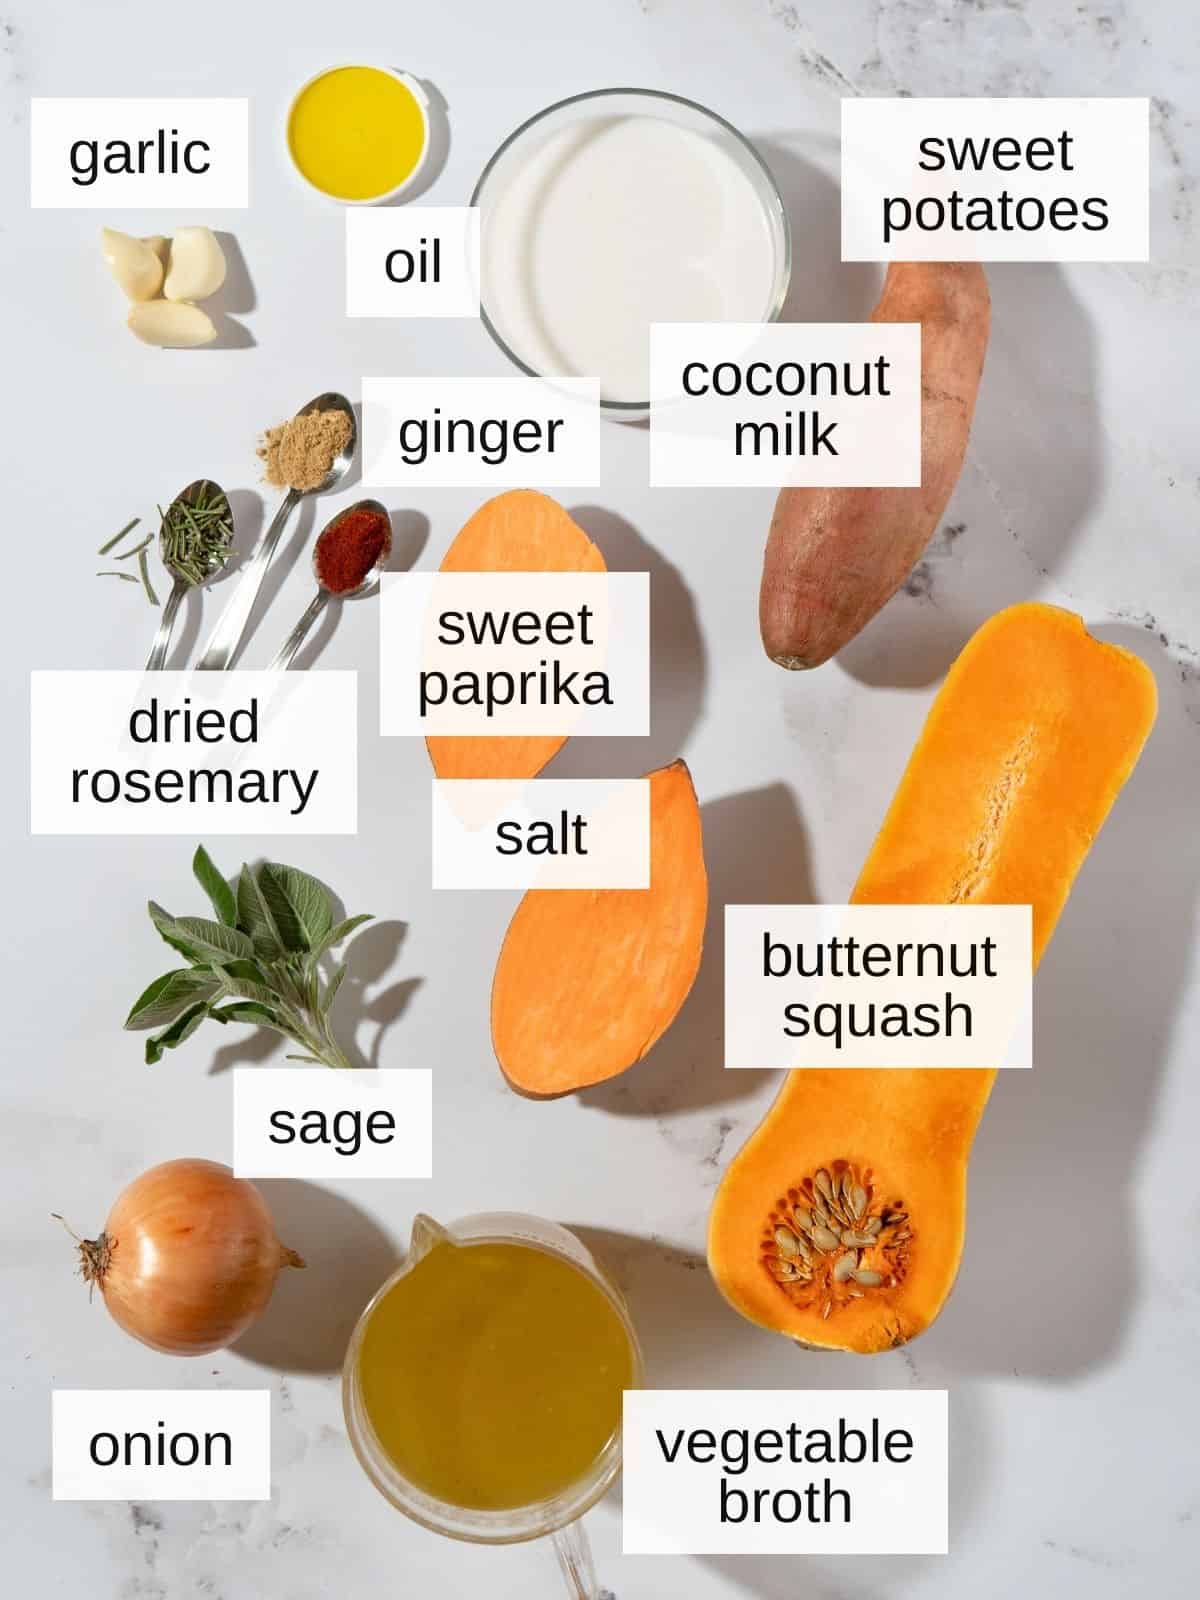 ingredients for butternut squash sweet potato soup including garlic, oil, ginger, sweet paprika, coconut milk, dried rosemary, salt, sage, onion, vegetable broth, butternut squash and sweet potatoes.